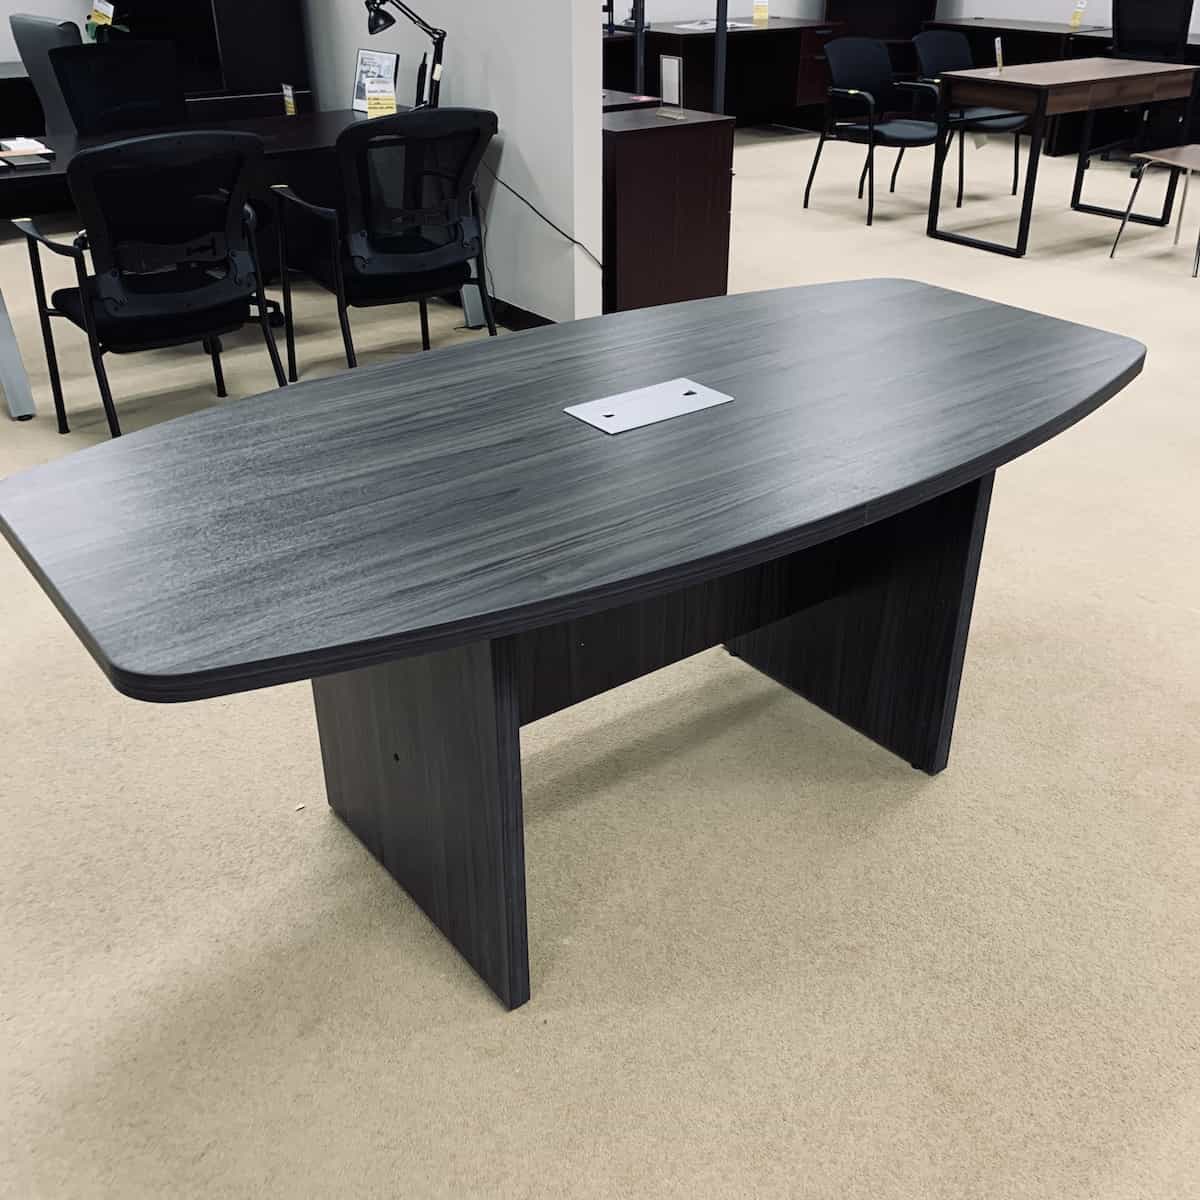 6-ft-conference-table-boat-grey